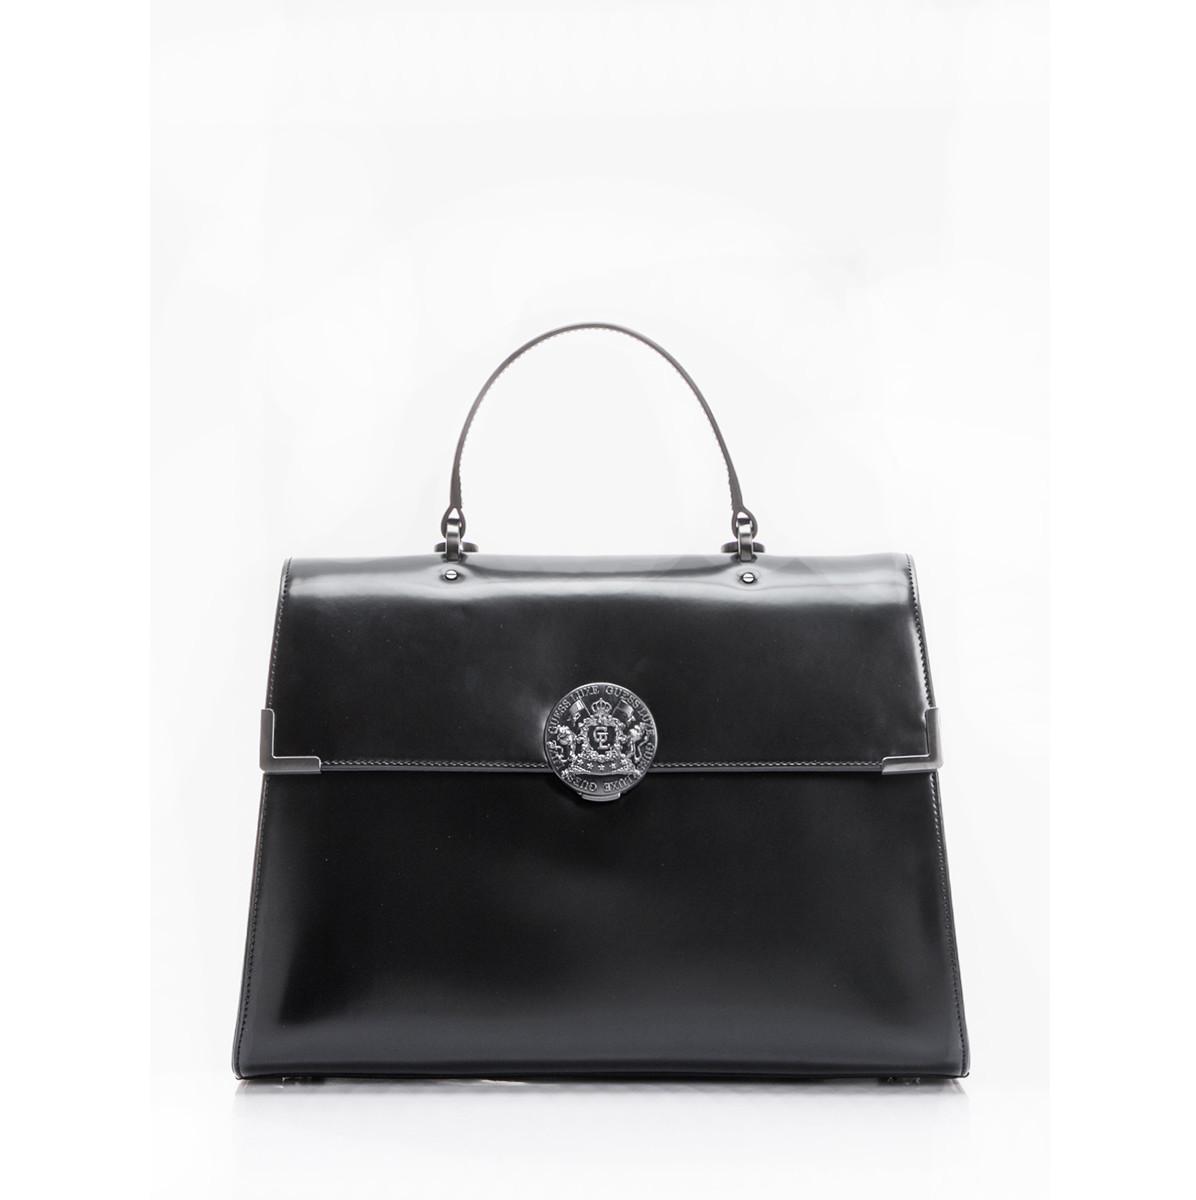 Guess - Luxe Leather Handbag